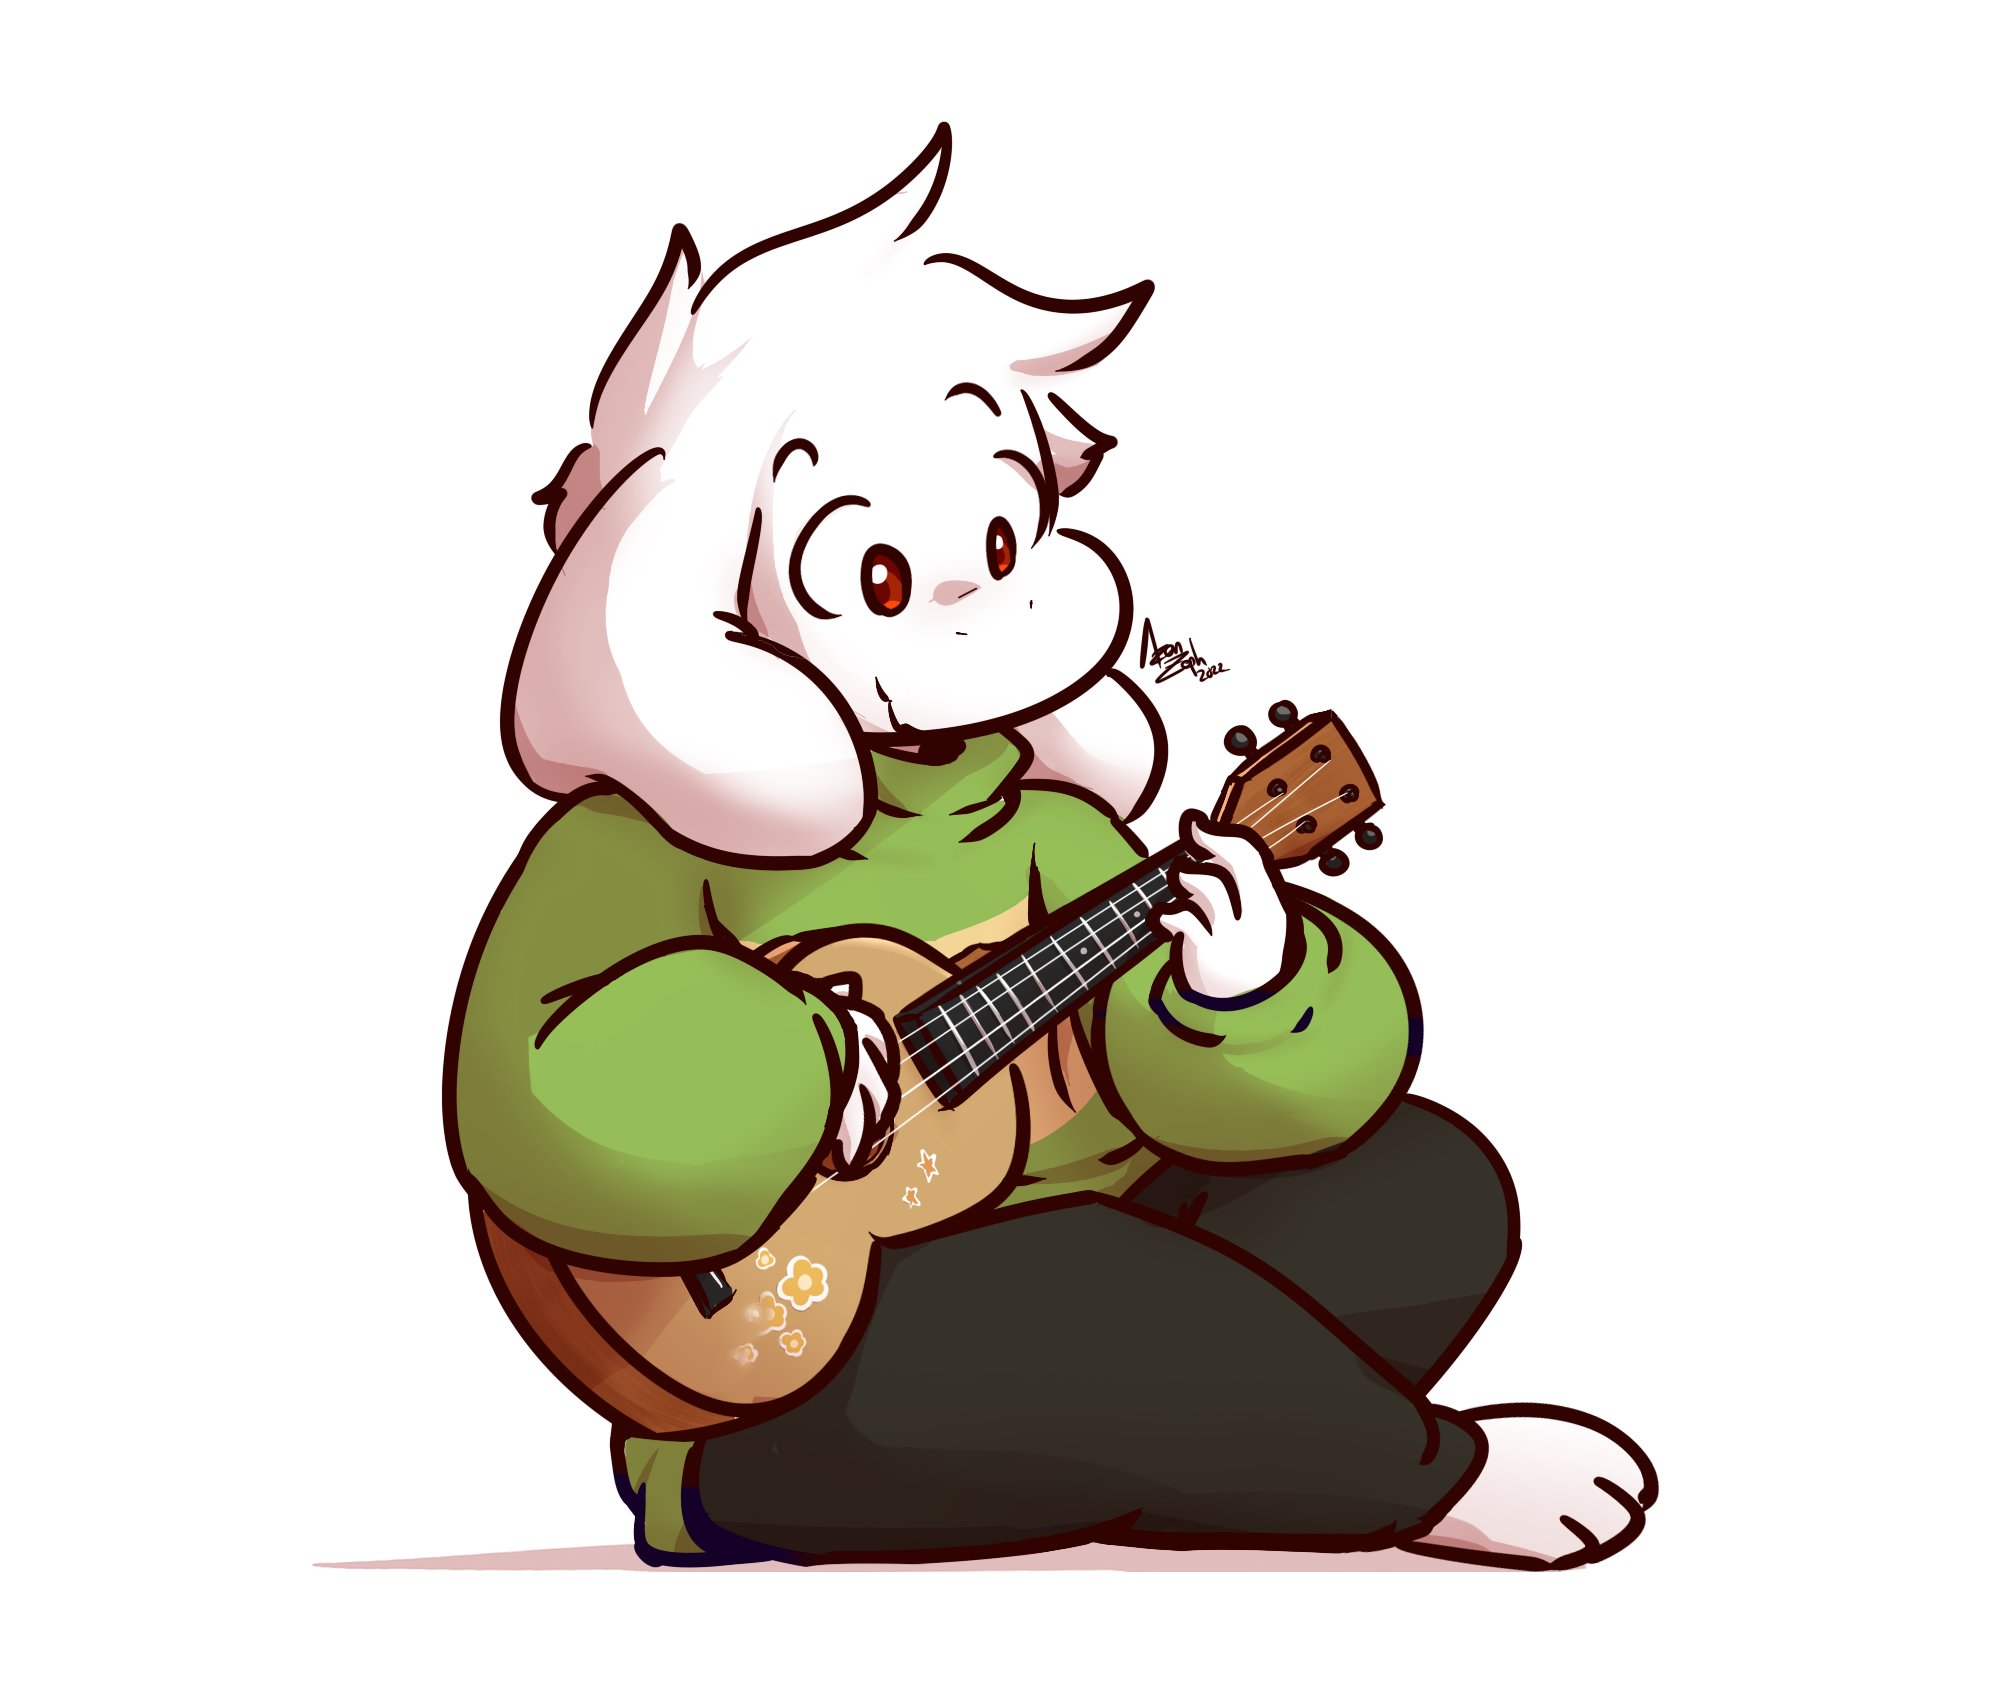 WendayTheFruitcake01 (Commissions Open!) on X: Undertale Characters: Final  With Asriel, that finished all the Undertale characters I'll draw. Luckily,  I plan to eventually draw Deltarune characterd, too! #undertale  #undertaleart #undertalefanart https